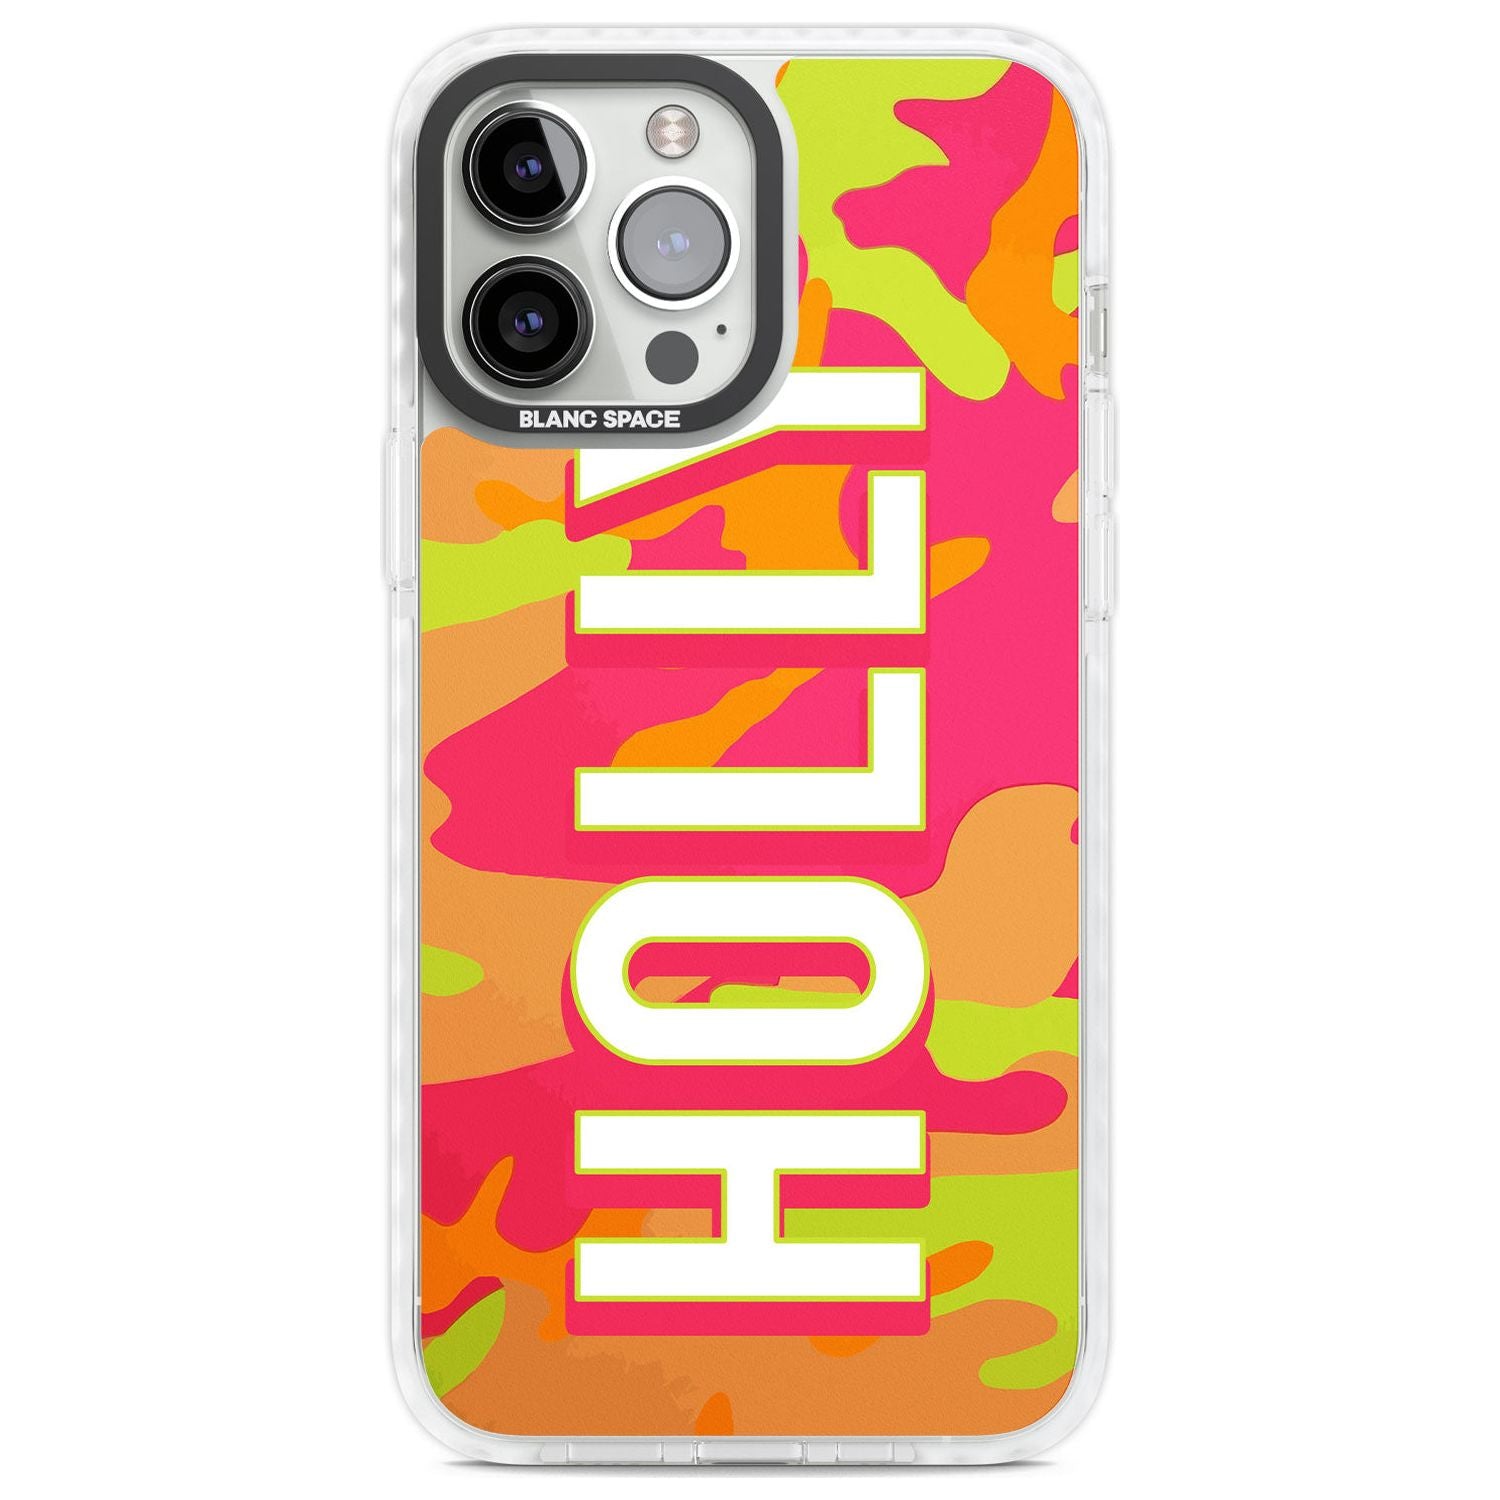 Personalised Colourful Neon Camo Custom Phone Case iPhone 13 Pro Max / Impact Case,iPhone 14 Pro Max / Impact Case Blanc Space